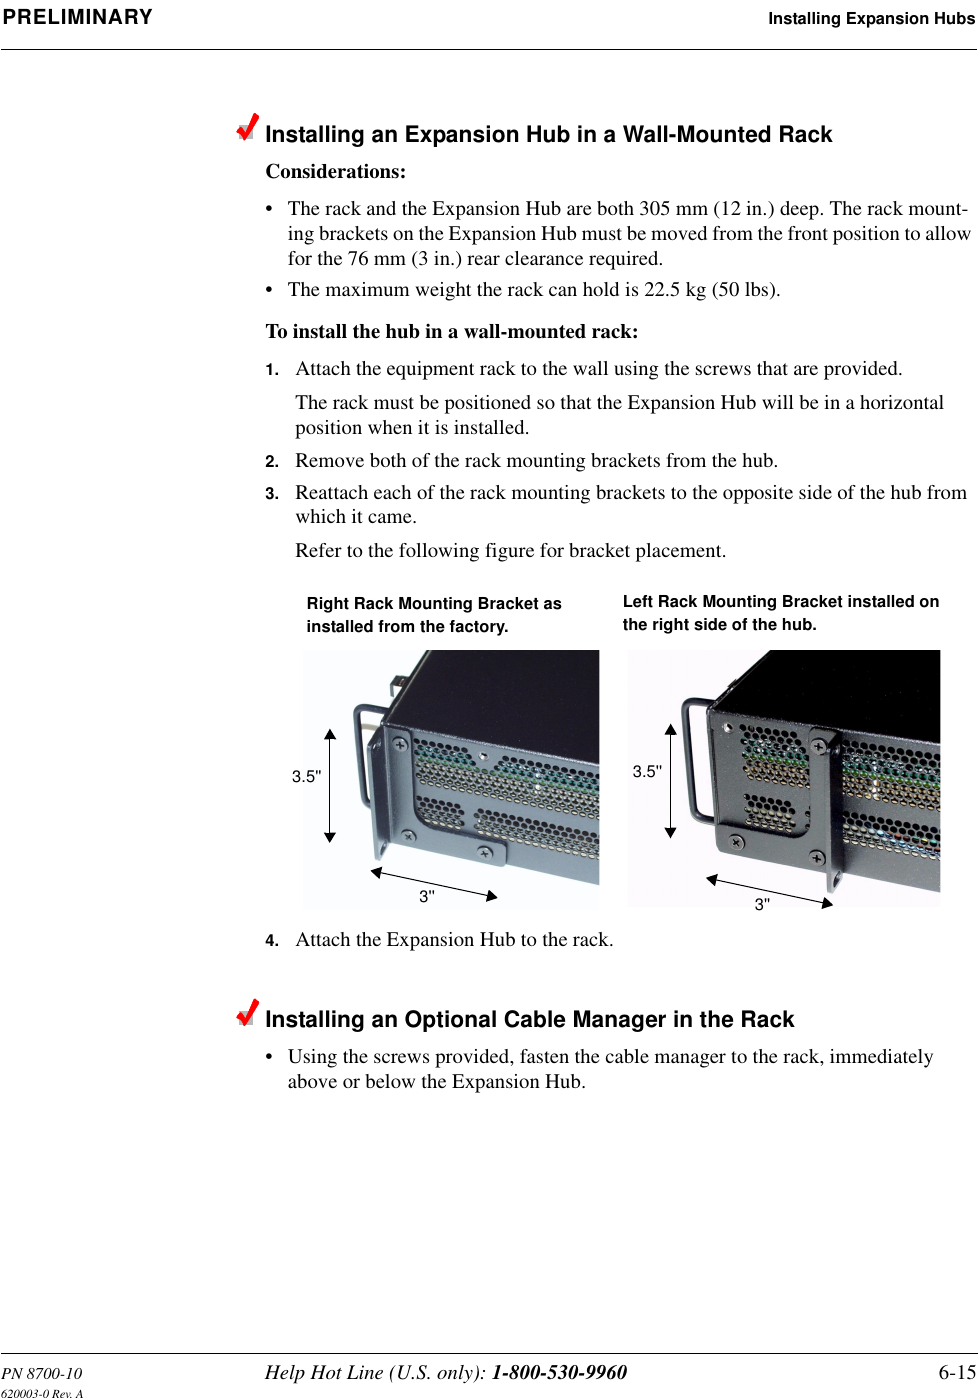 PN 8700-10 Help Hot Line (U.S. only): 1-800-530-9960 6-15620003-0 Rev. APRELIMINARY Installing Expansion HubsInstalling an Expansion Hub in a Wall-Mounted RackConsiderations:• The rack and the Expansion Hub are both 305 mm (12 in.) deep. The rack mount-ing brackets on the Expansion Hub must be moved from the front position to allow for the 76 mm (3 in.) rear clearance required.• The maximum weight the rack can hold is 22.5 kg (50 lbs).To install the hub in a wall-mounted rack:1. Attach the equipment rack to the wall using the screws that are provided.The rack must be positioned so that the Expansion Hub will be in a horizontal position when it is installed.2. Remove both of the rack mounting brackets from the hub.3. Reattach each of the rack mounting brackets to the opposite side of the hub from which it came.Refer to the following figure for bracket placement.4. Attach the Expansion Hub to the rack.Installing an Optional Cable Manager in the Rack• Using the screws provided, fasten the cable manager to the rack, immediately above or below the Expansion Hub.Right Rack Mounting Bracket as installed from the factory.Left Rack Mounting Bracket installed onthe right side of the hub.3&apos;&apos;3.5&apos;&apos;3&apos;&apos;3.5&apos;&apos;